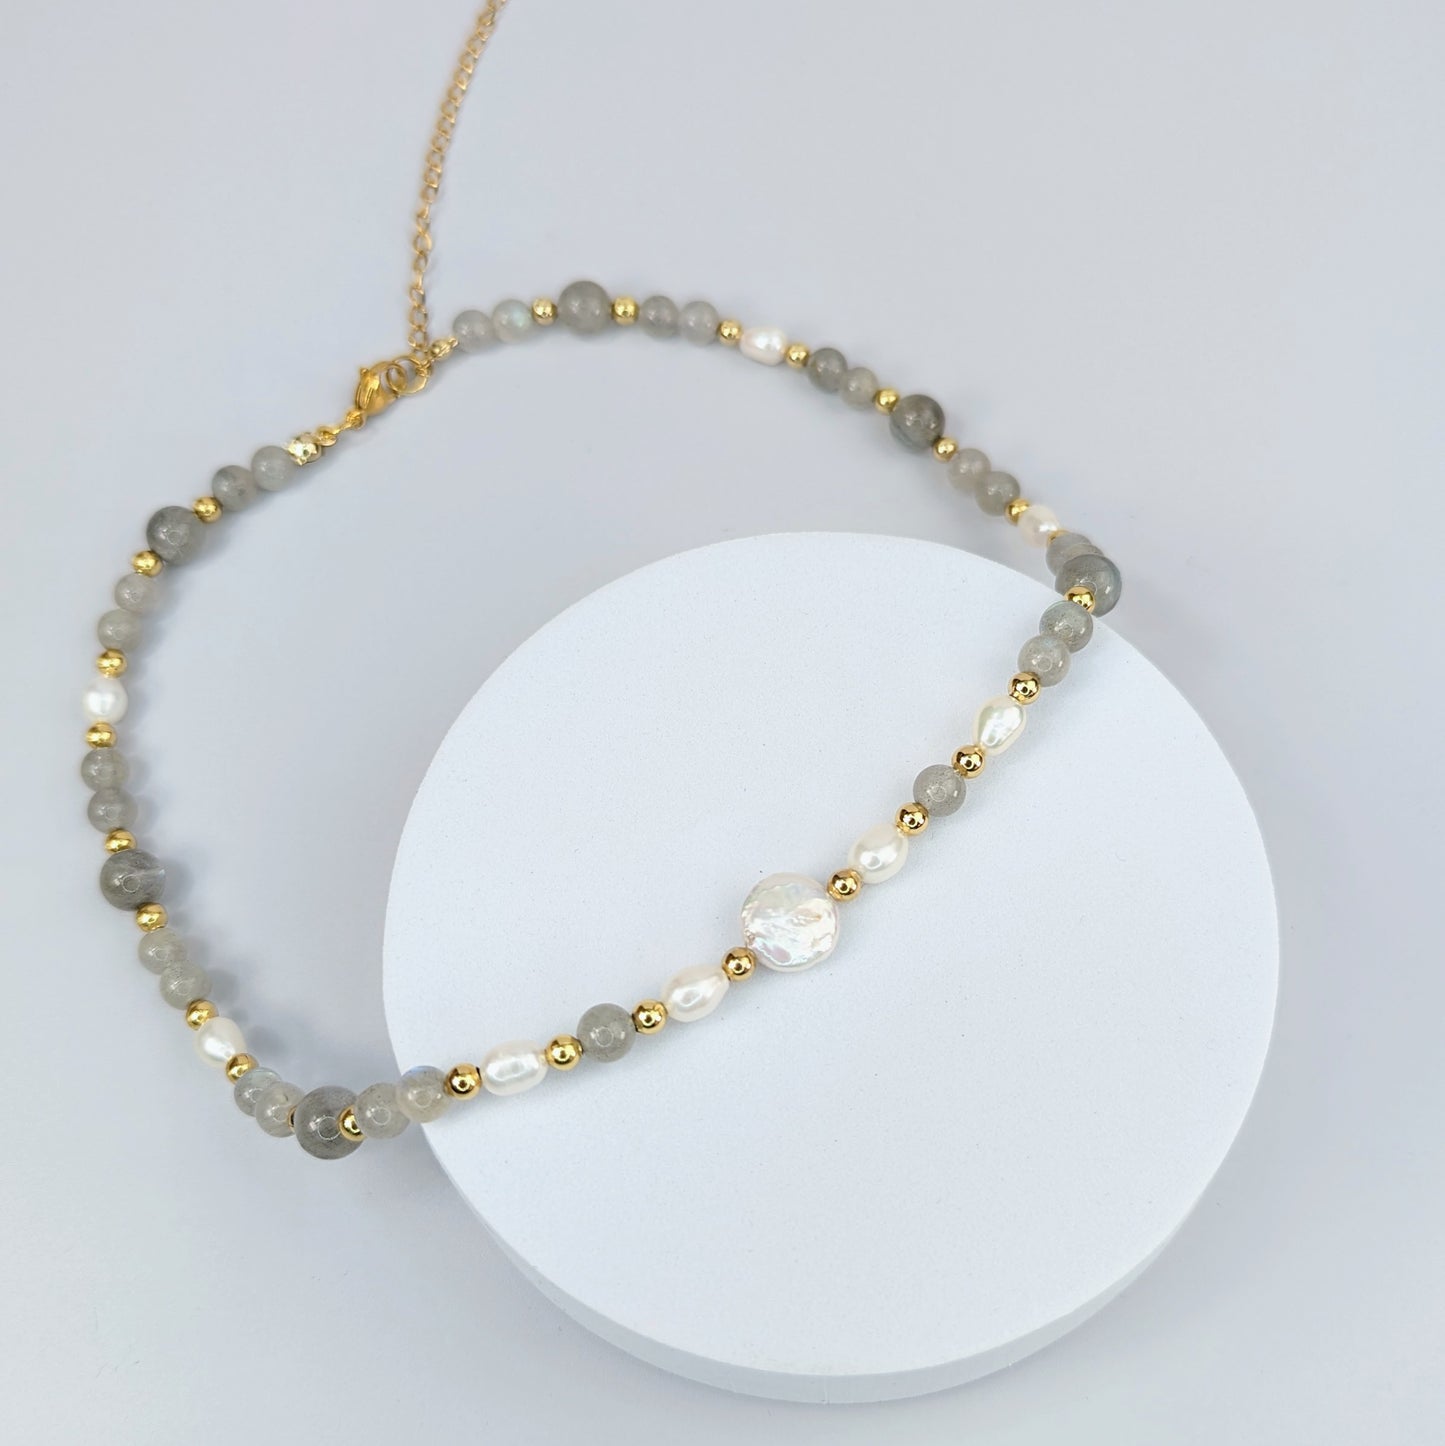 Lunar Luster: Freshwater Pearls and Moonstone Choker